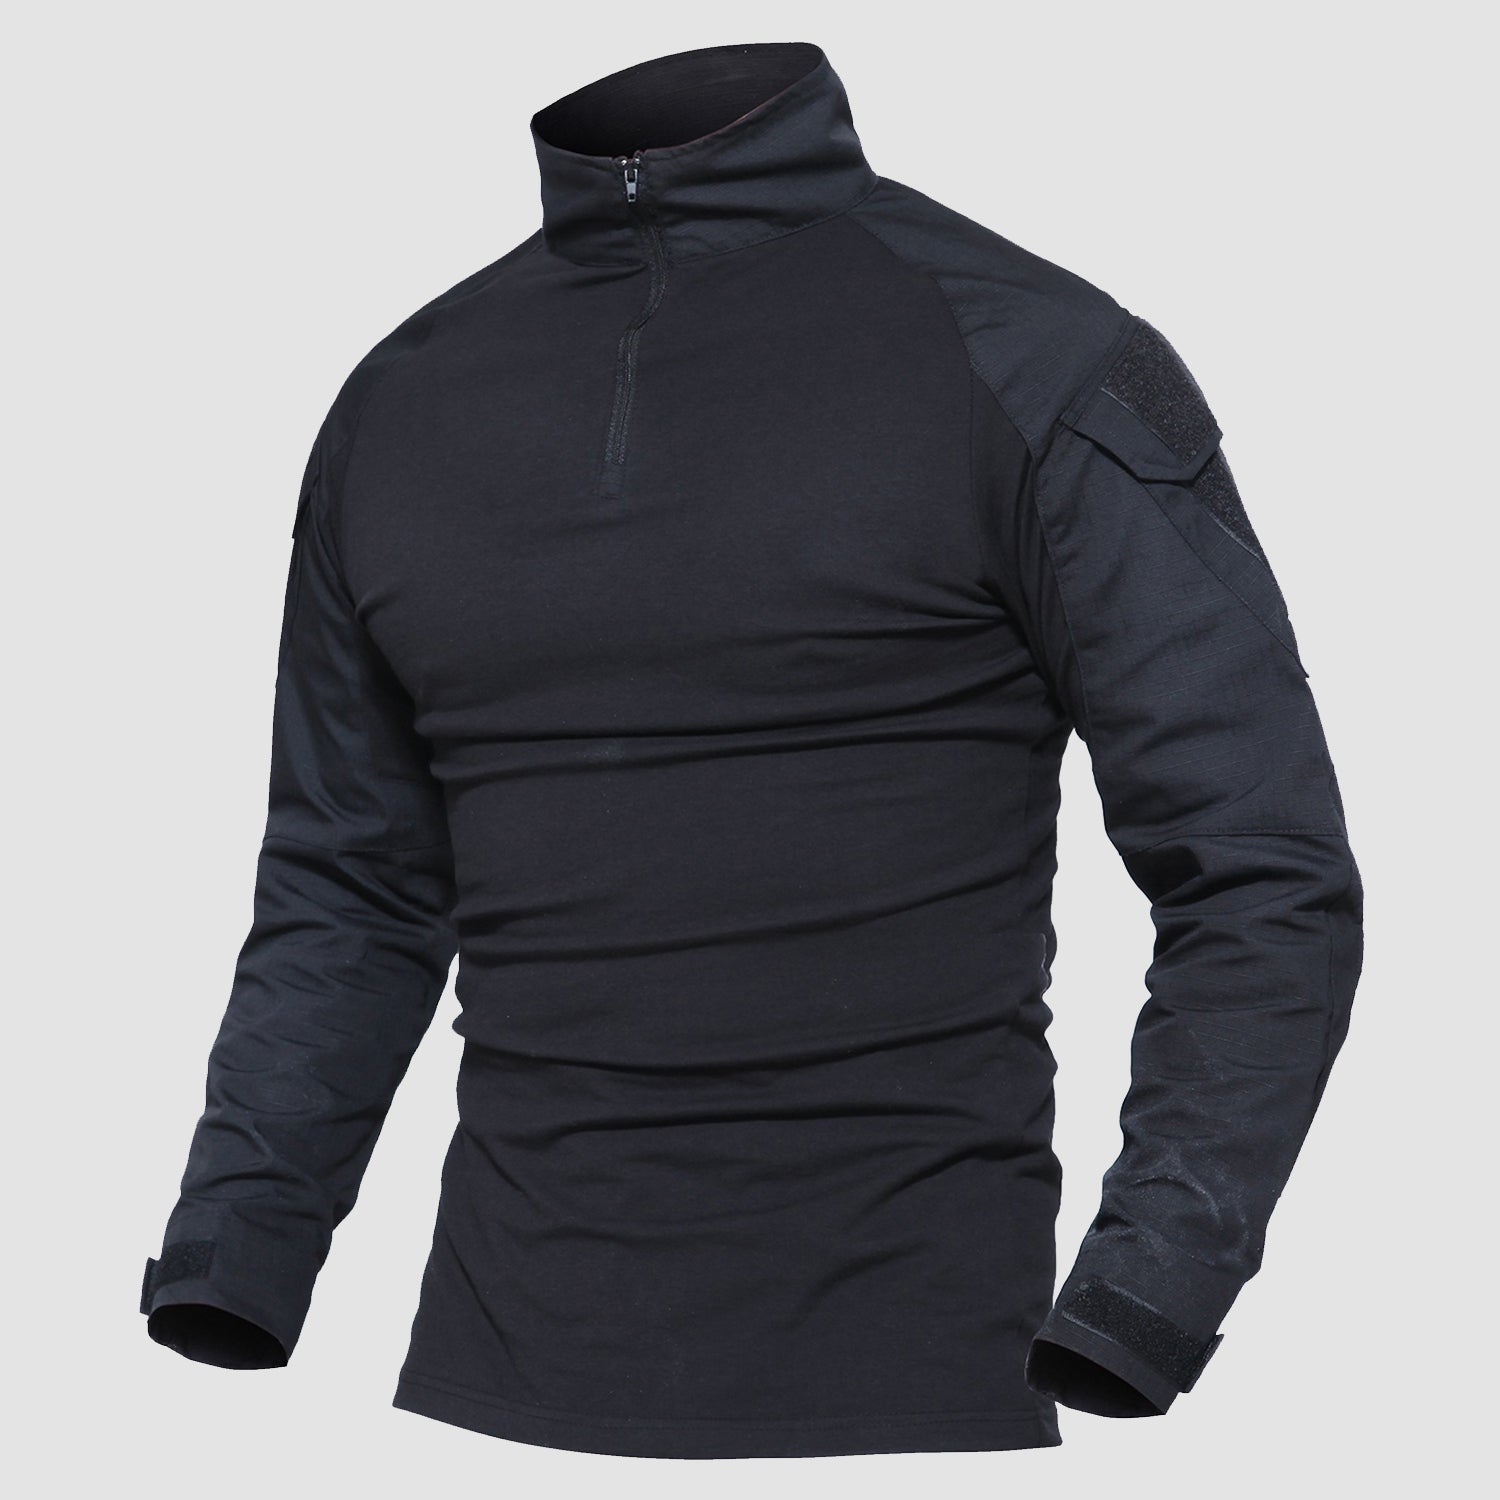 Men's Tactical | Tactical Clothing And Gear | MAGCOMSEN